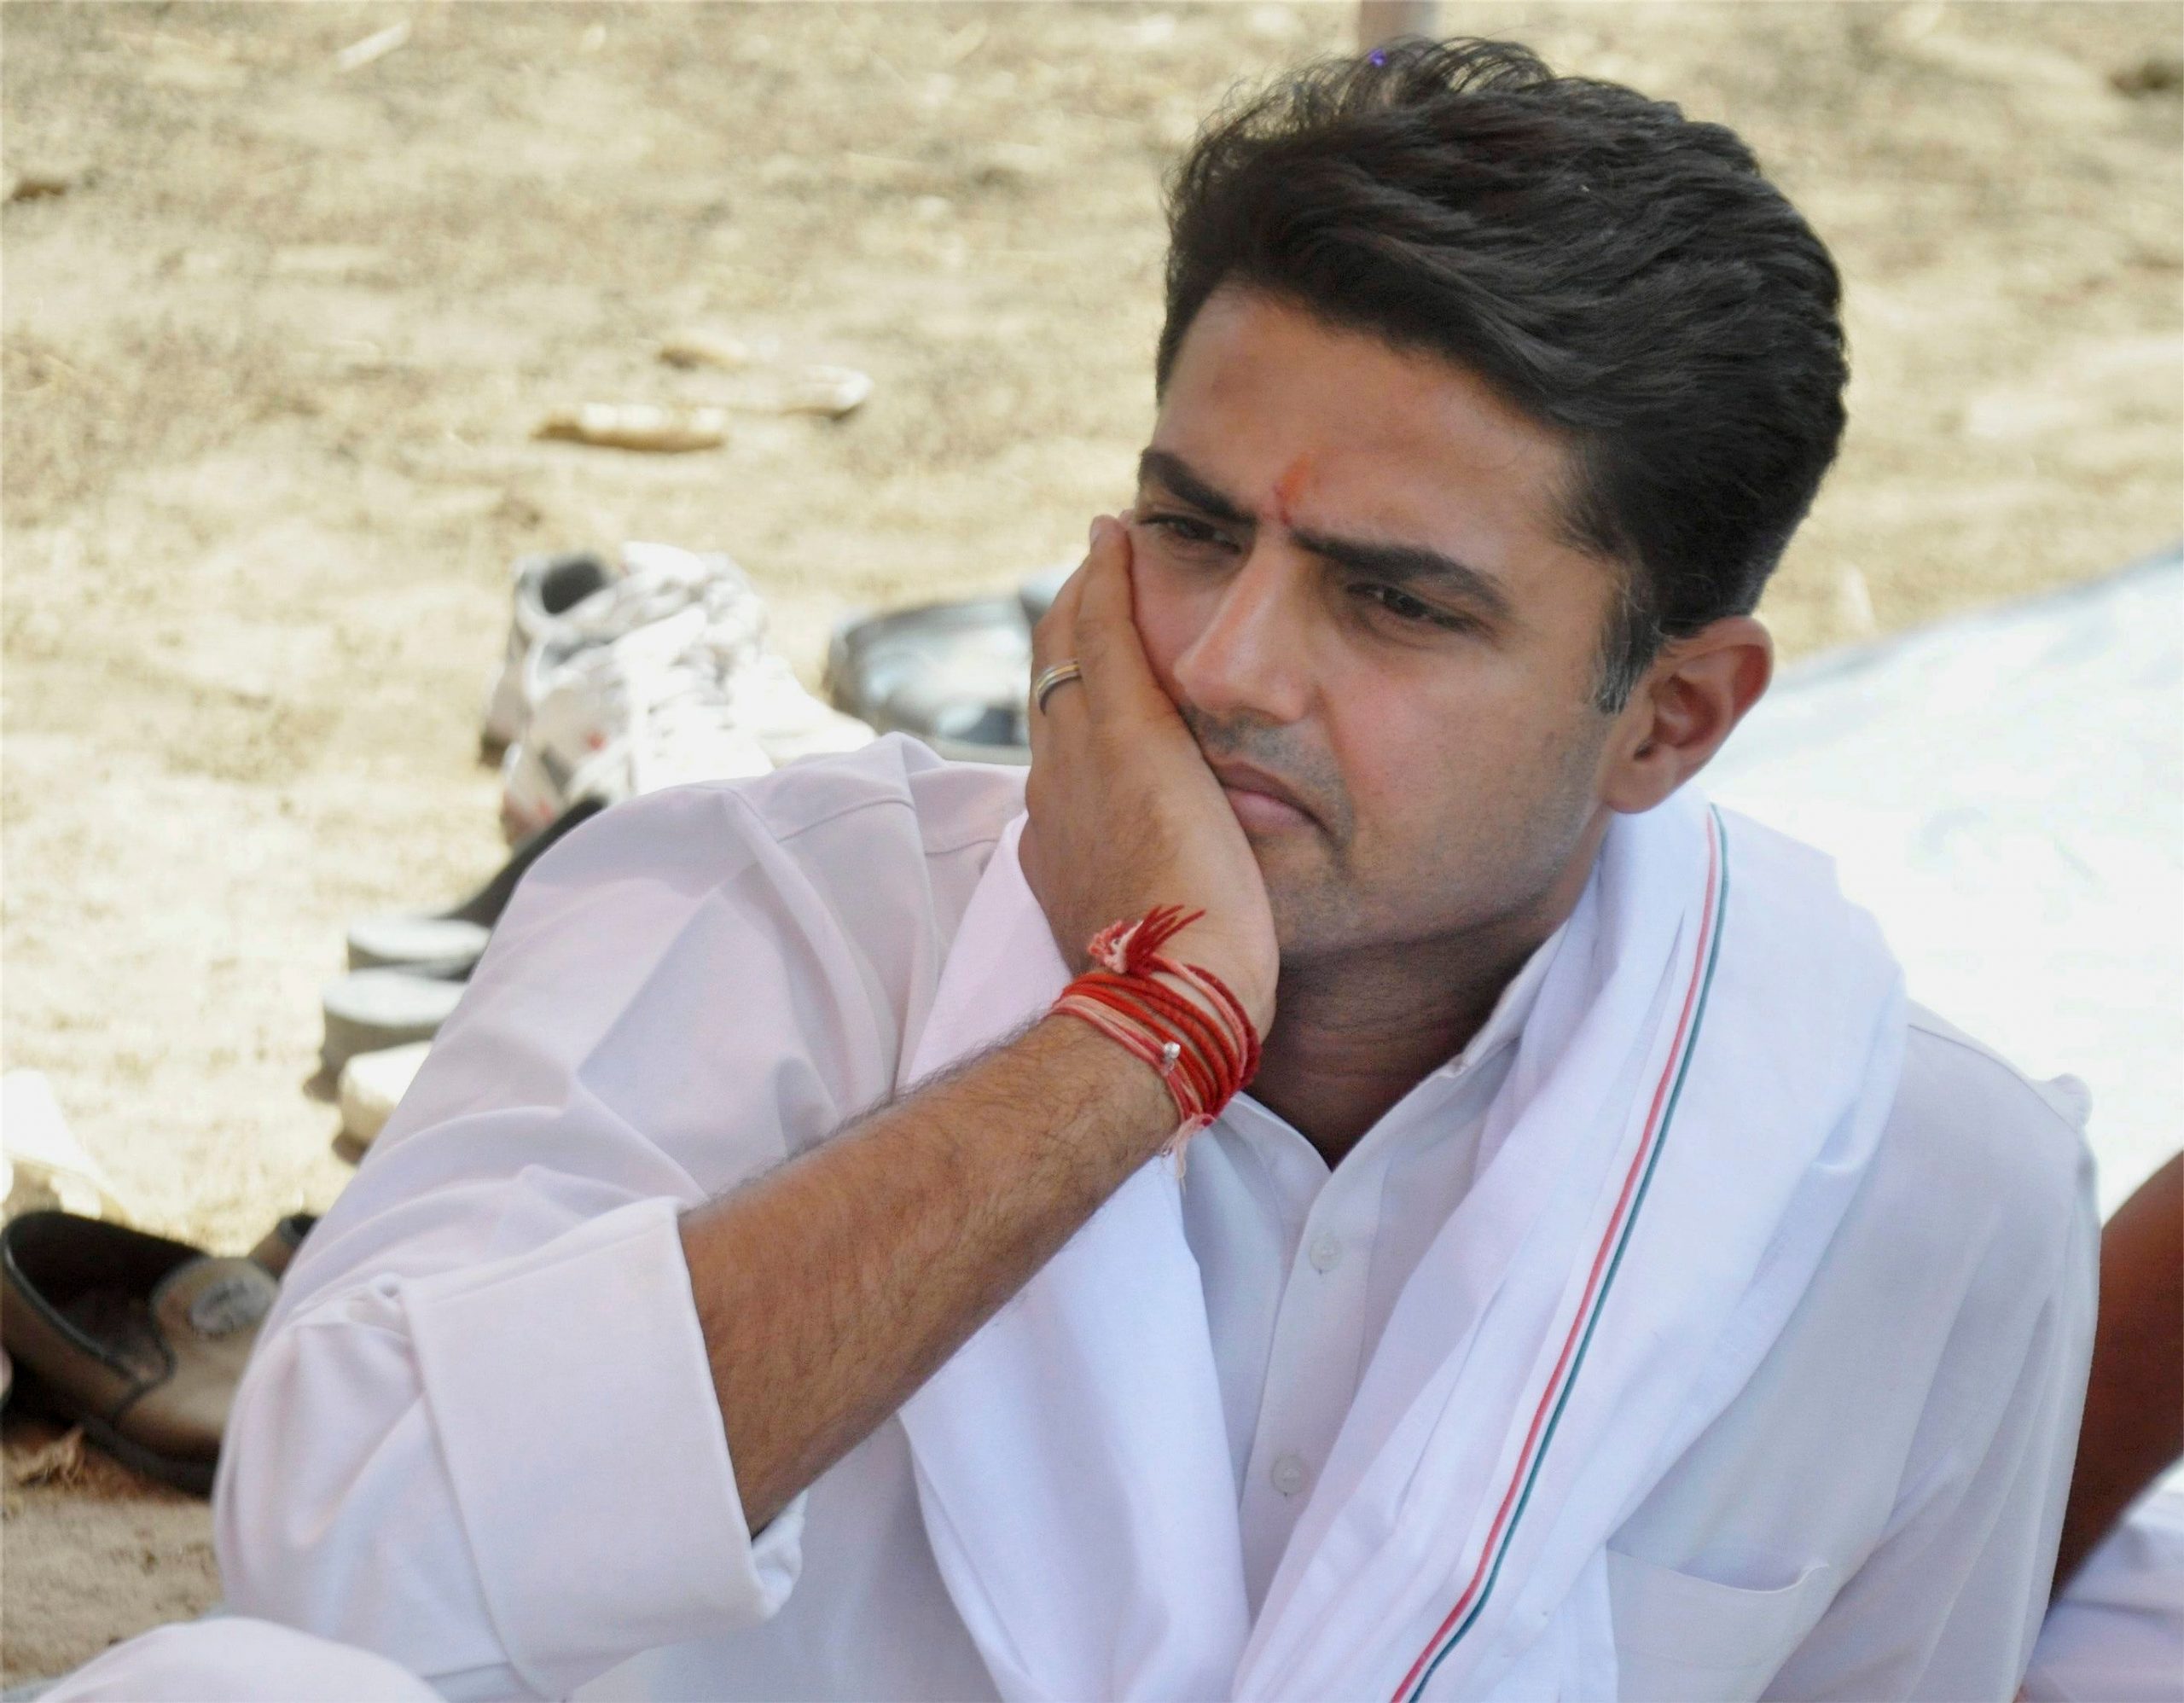 In BJP leader’s cryptic tweet, hint about Sachin Pilot’s next move